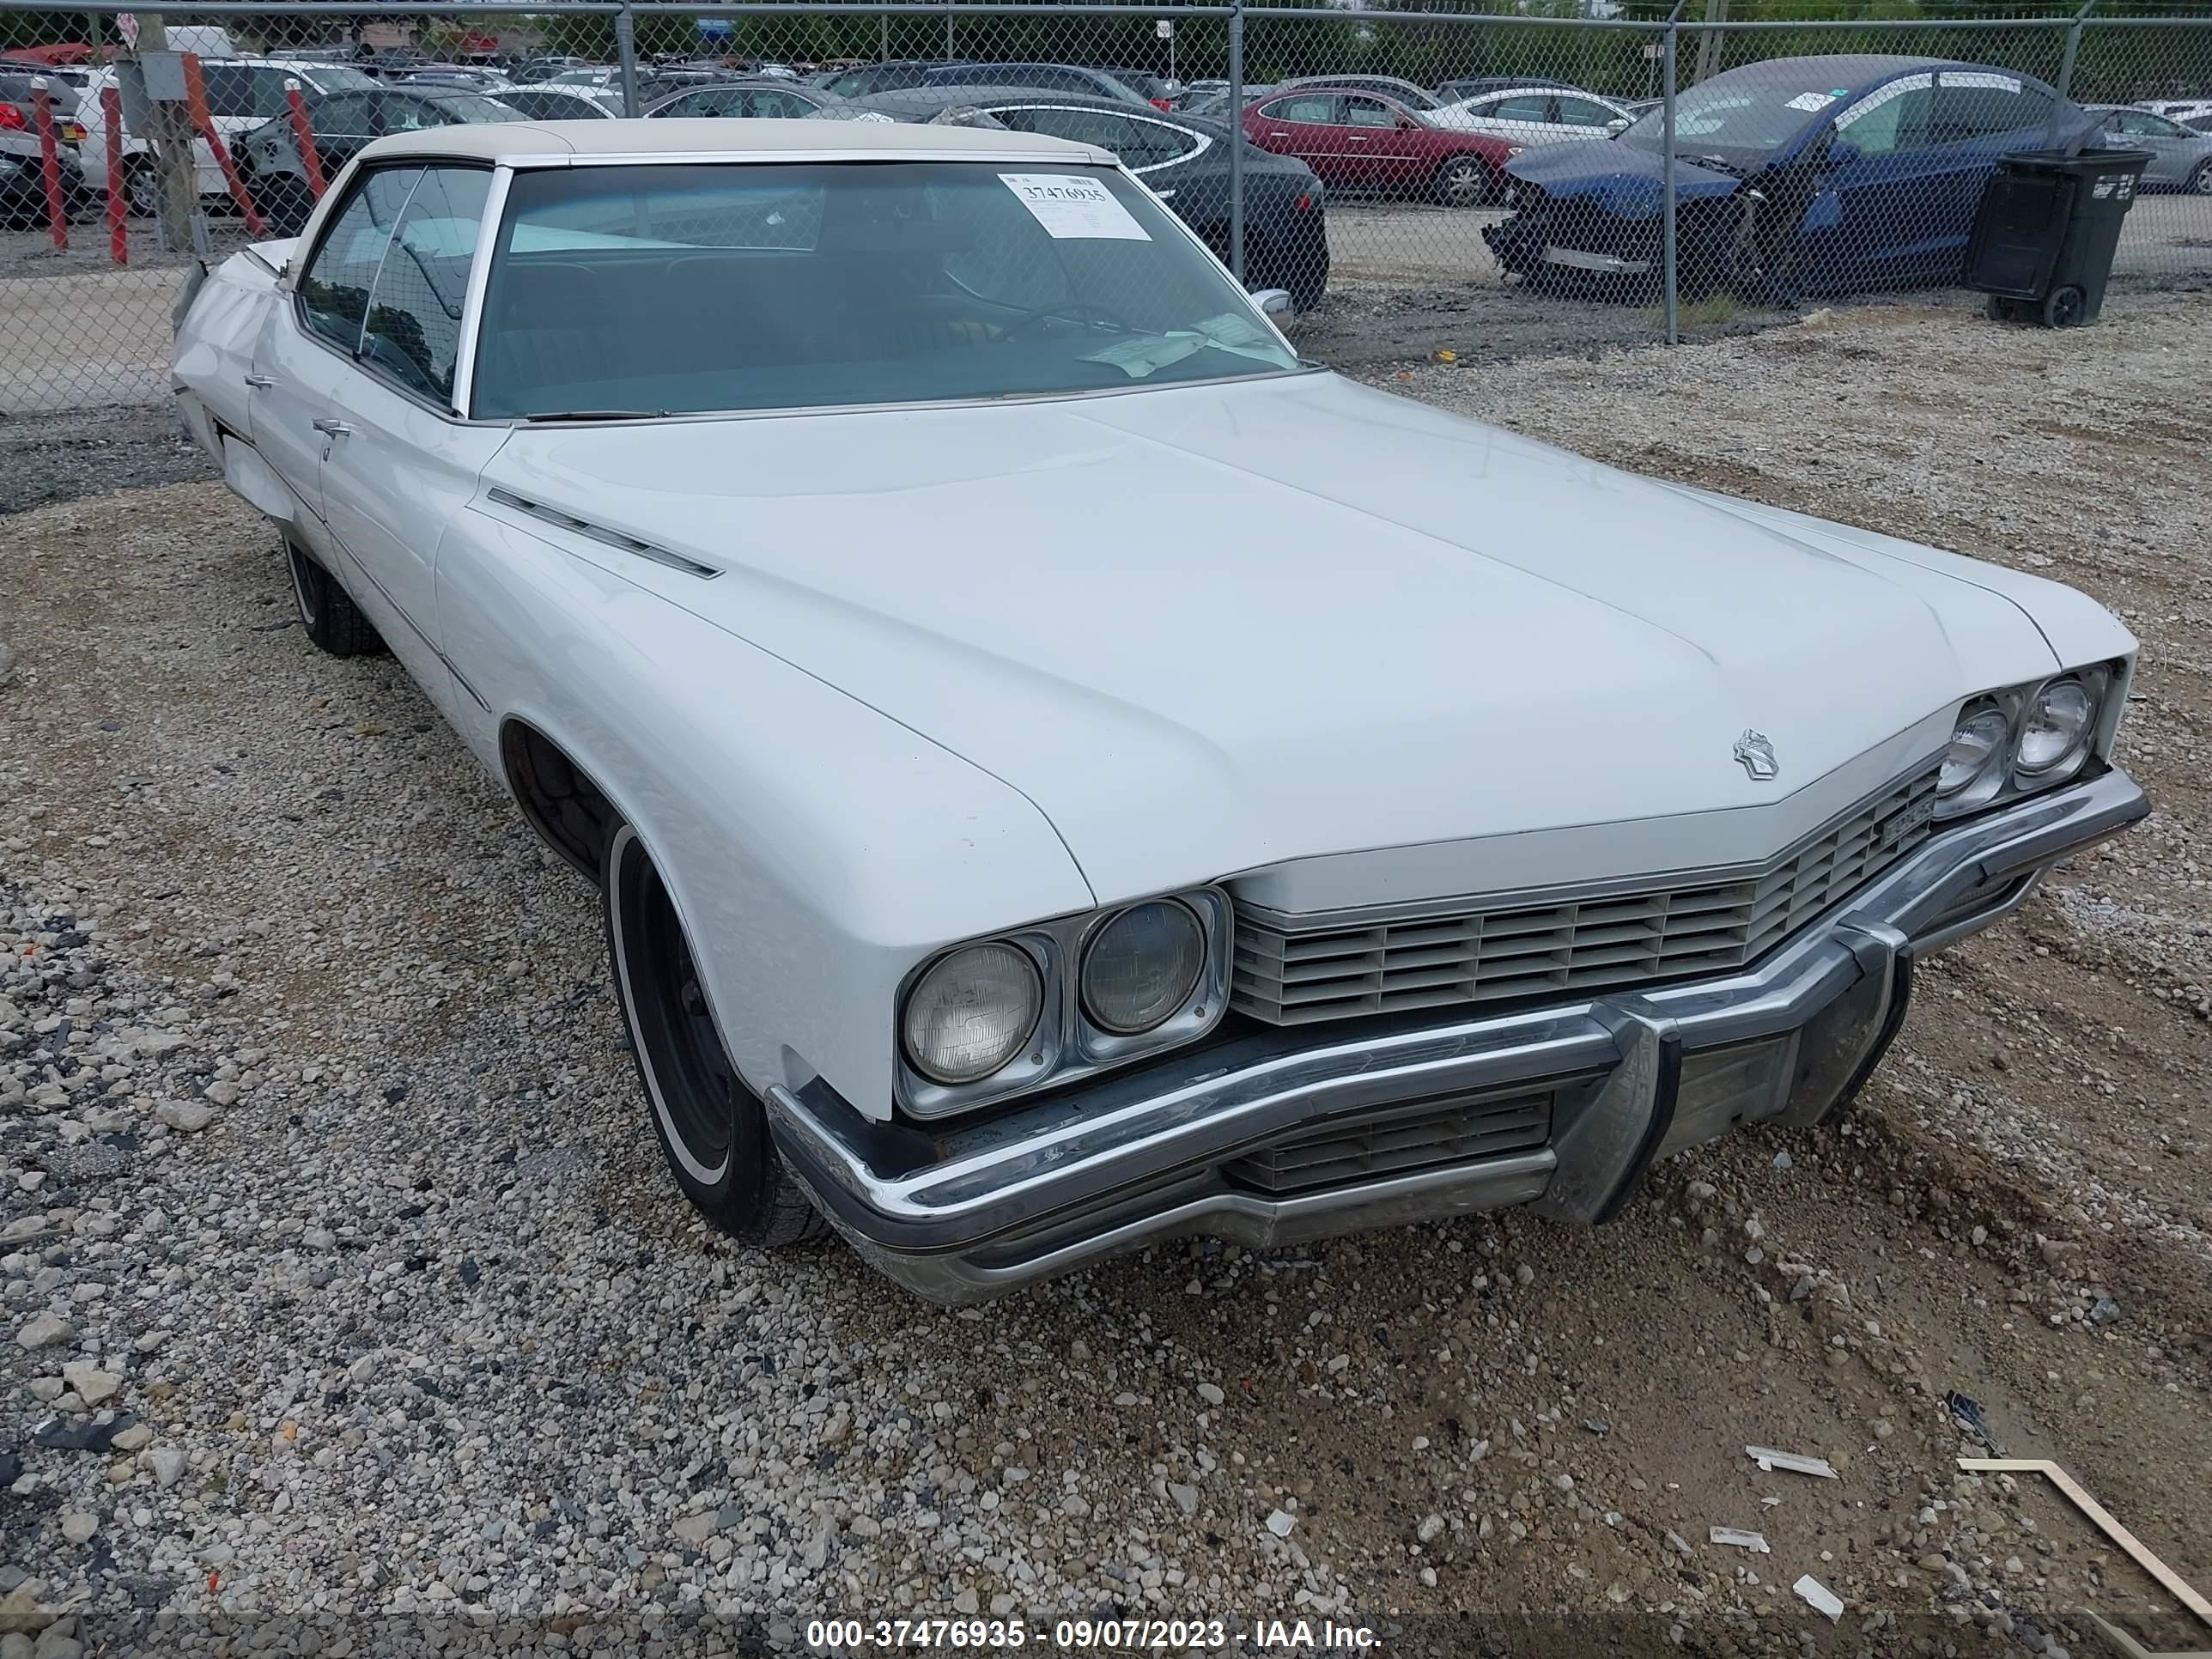 vin: 00004V39T2H470458 00004V39T2H470458 1972 buick electra 0 for Sale in 60428, 16425 Crawford Ave, Markham, Illinois, USA